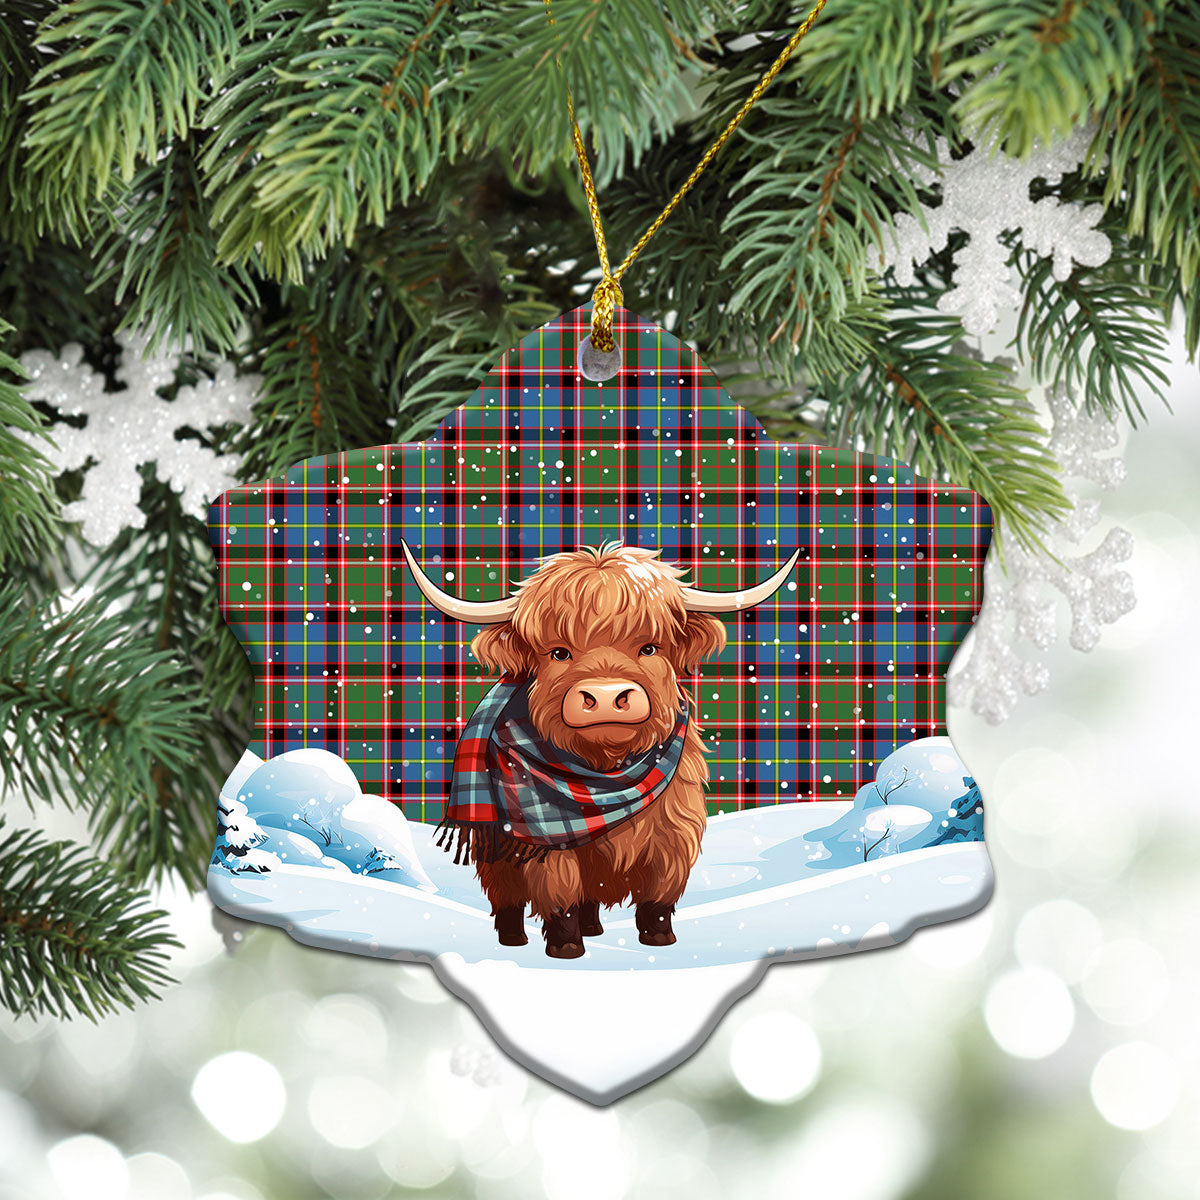 Stirling (of Cadder-Present Chief) Tartan Christmas Ceramic Ornament - Highland Cows Snow Style